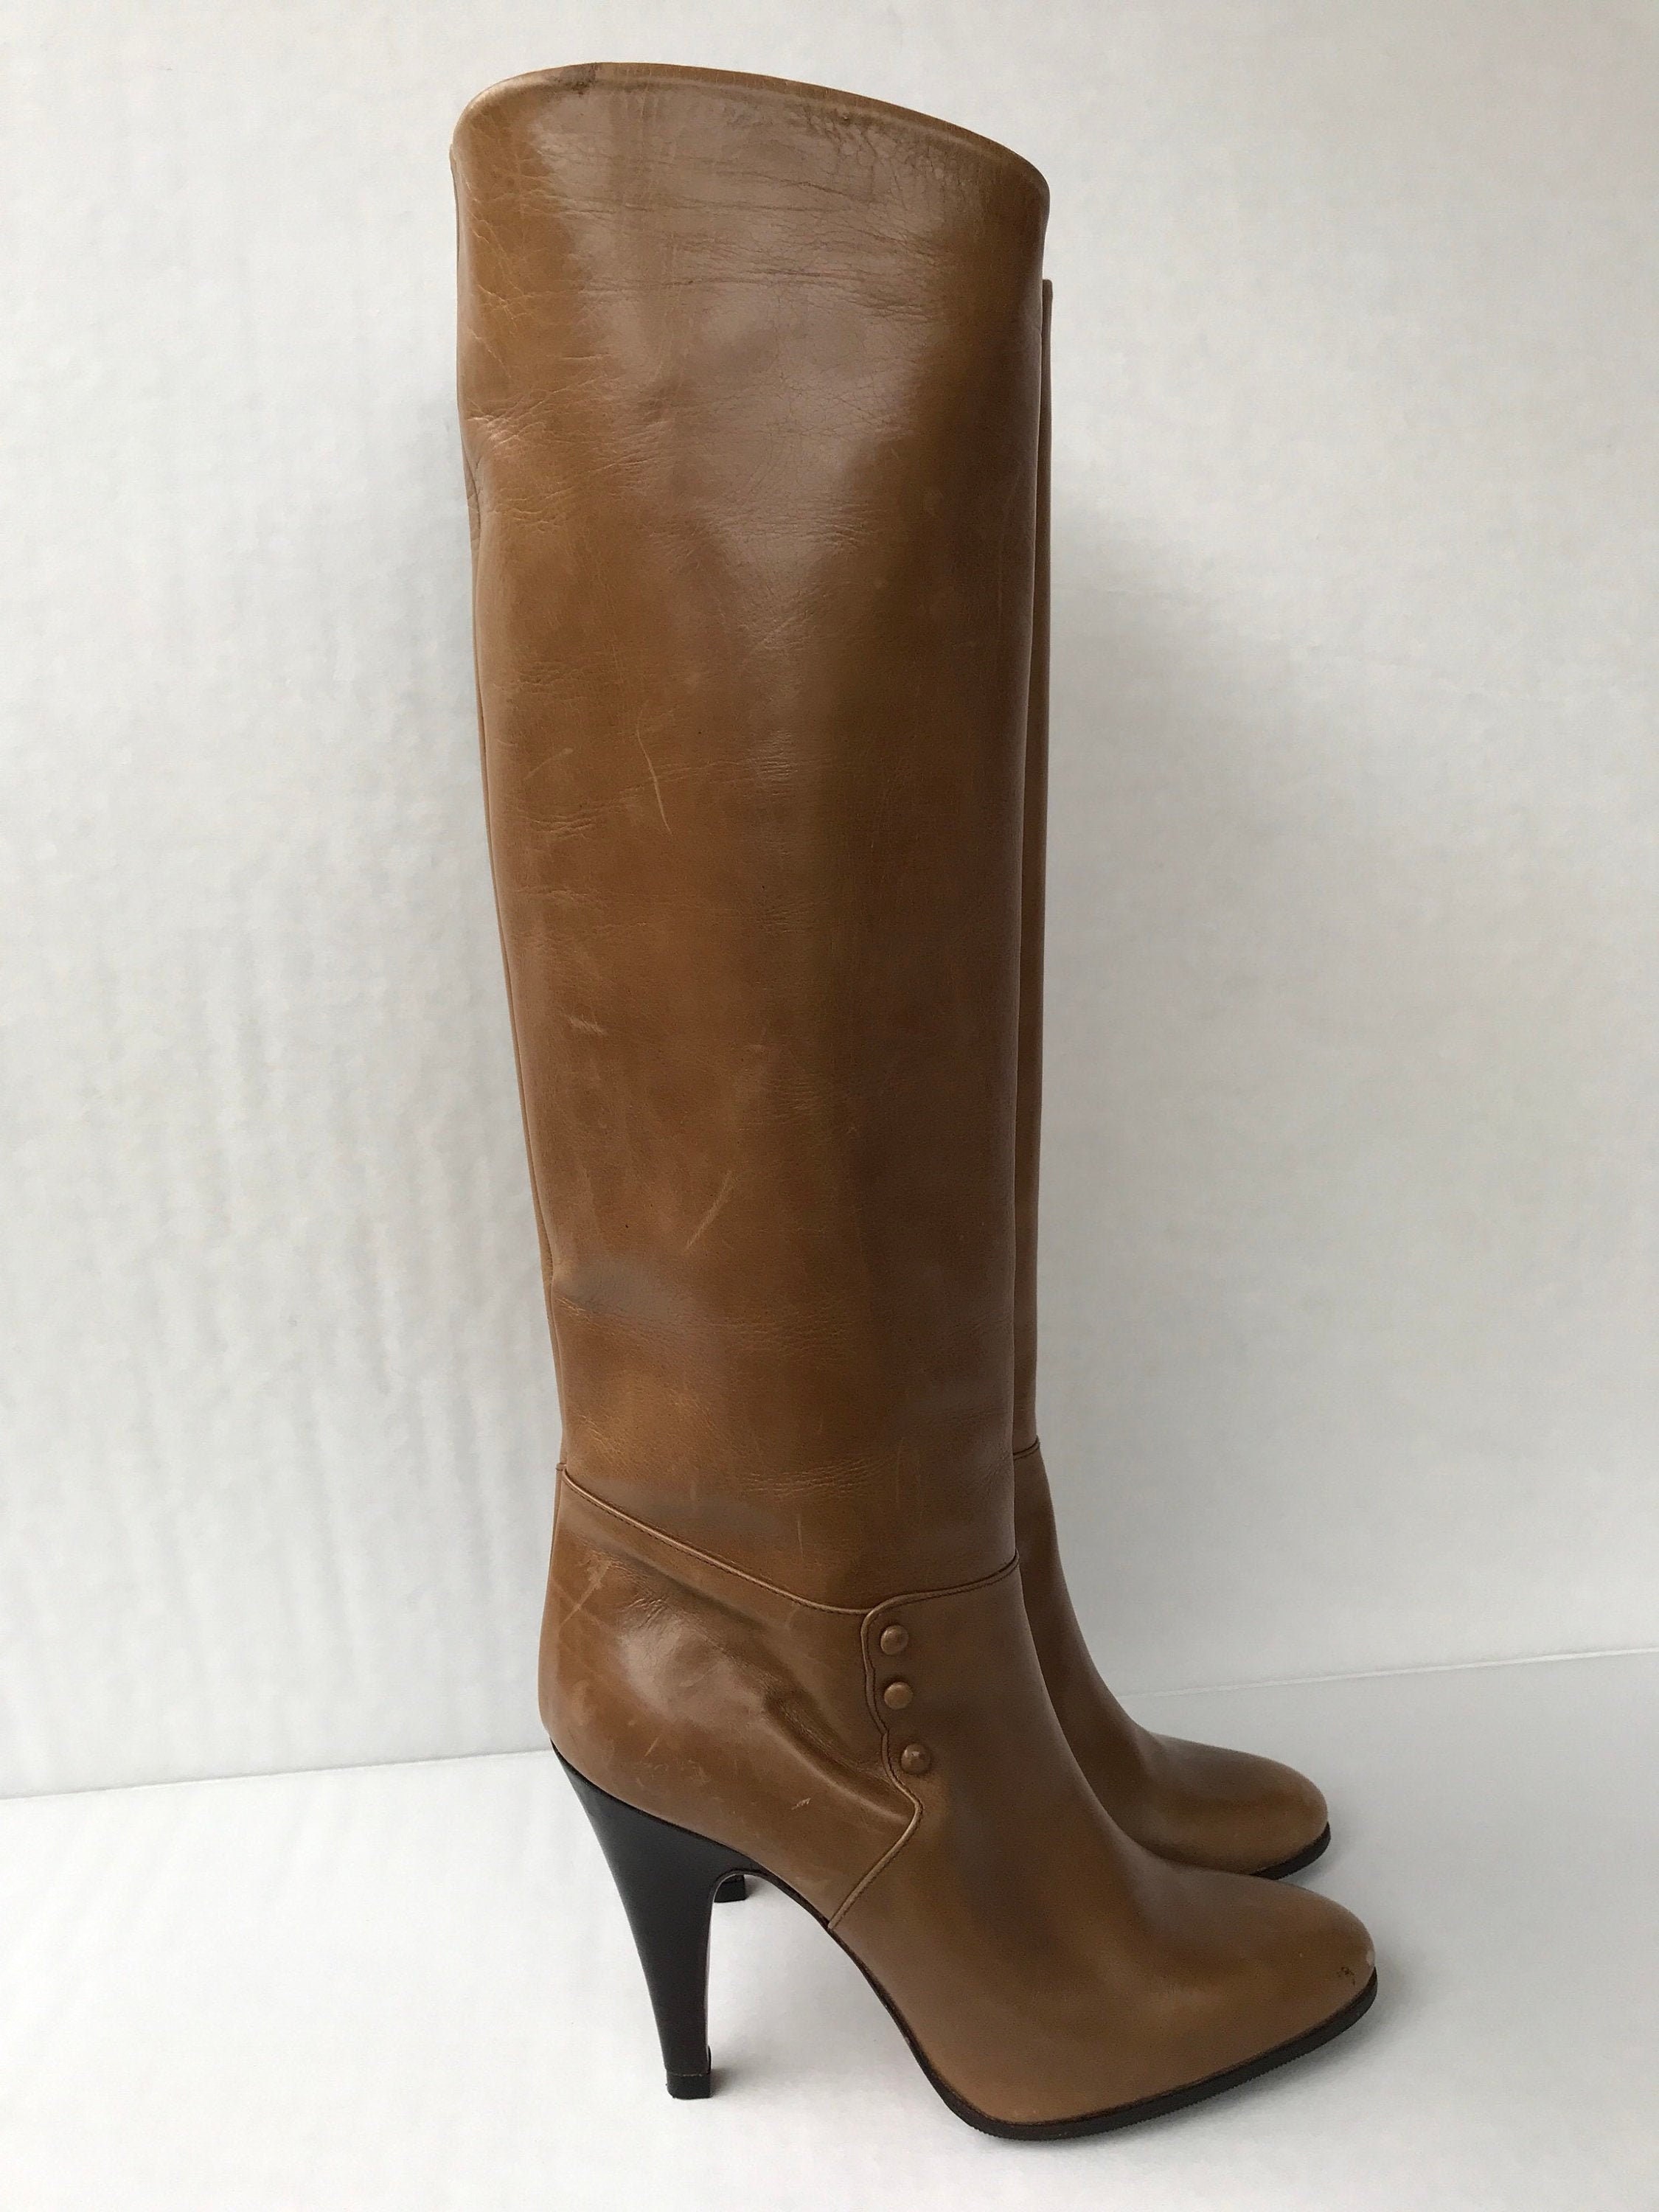 Vintage Marmoloda made in Italy Leather Knee High Boots 8 | Etsy